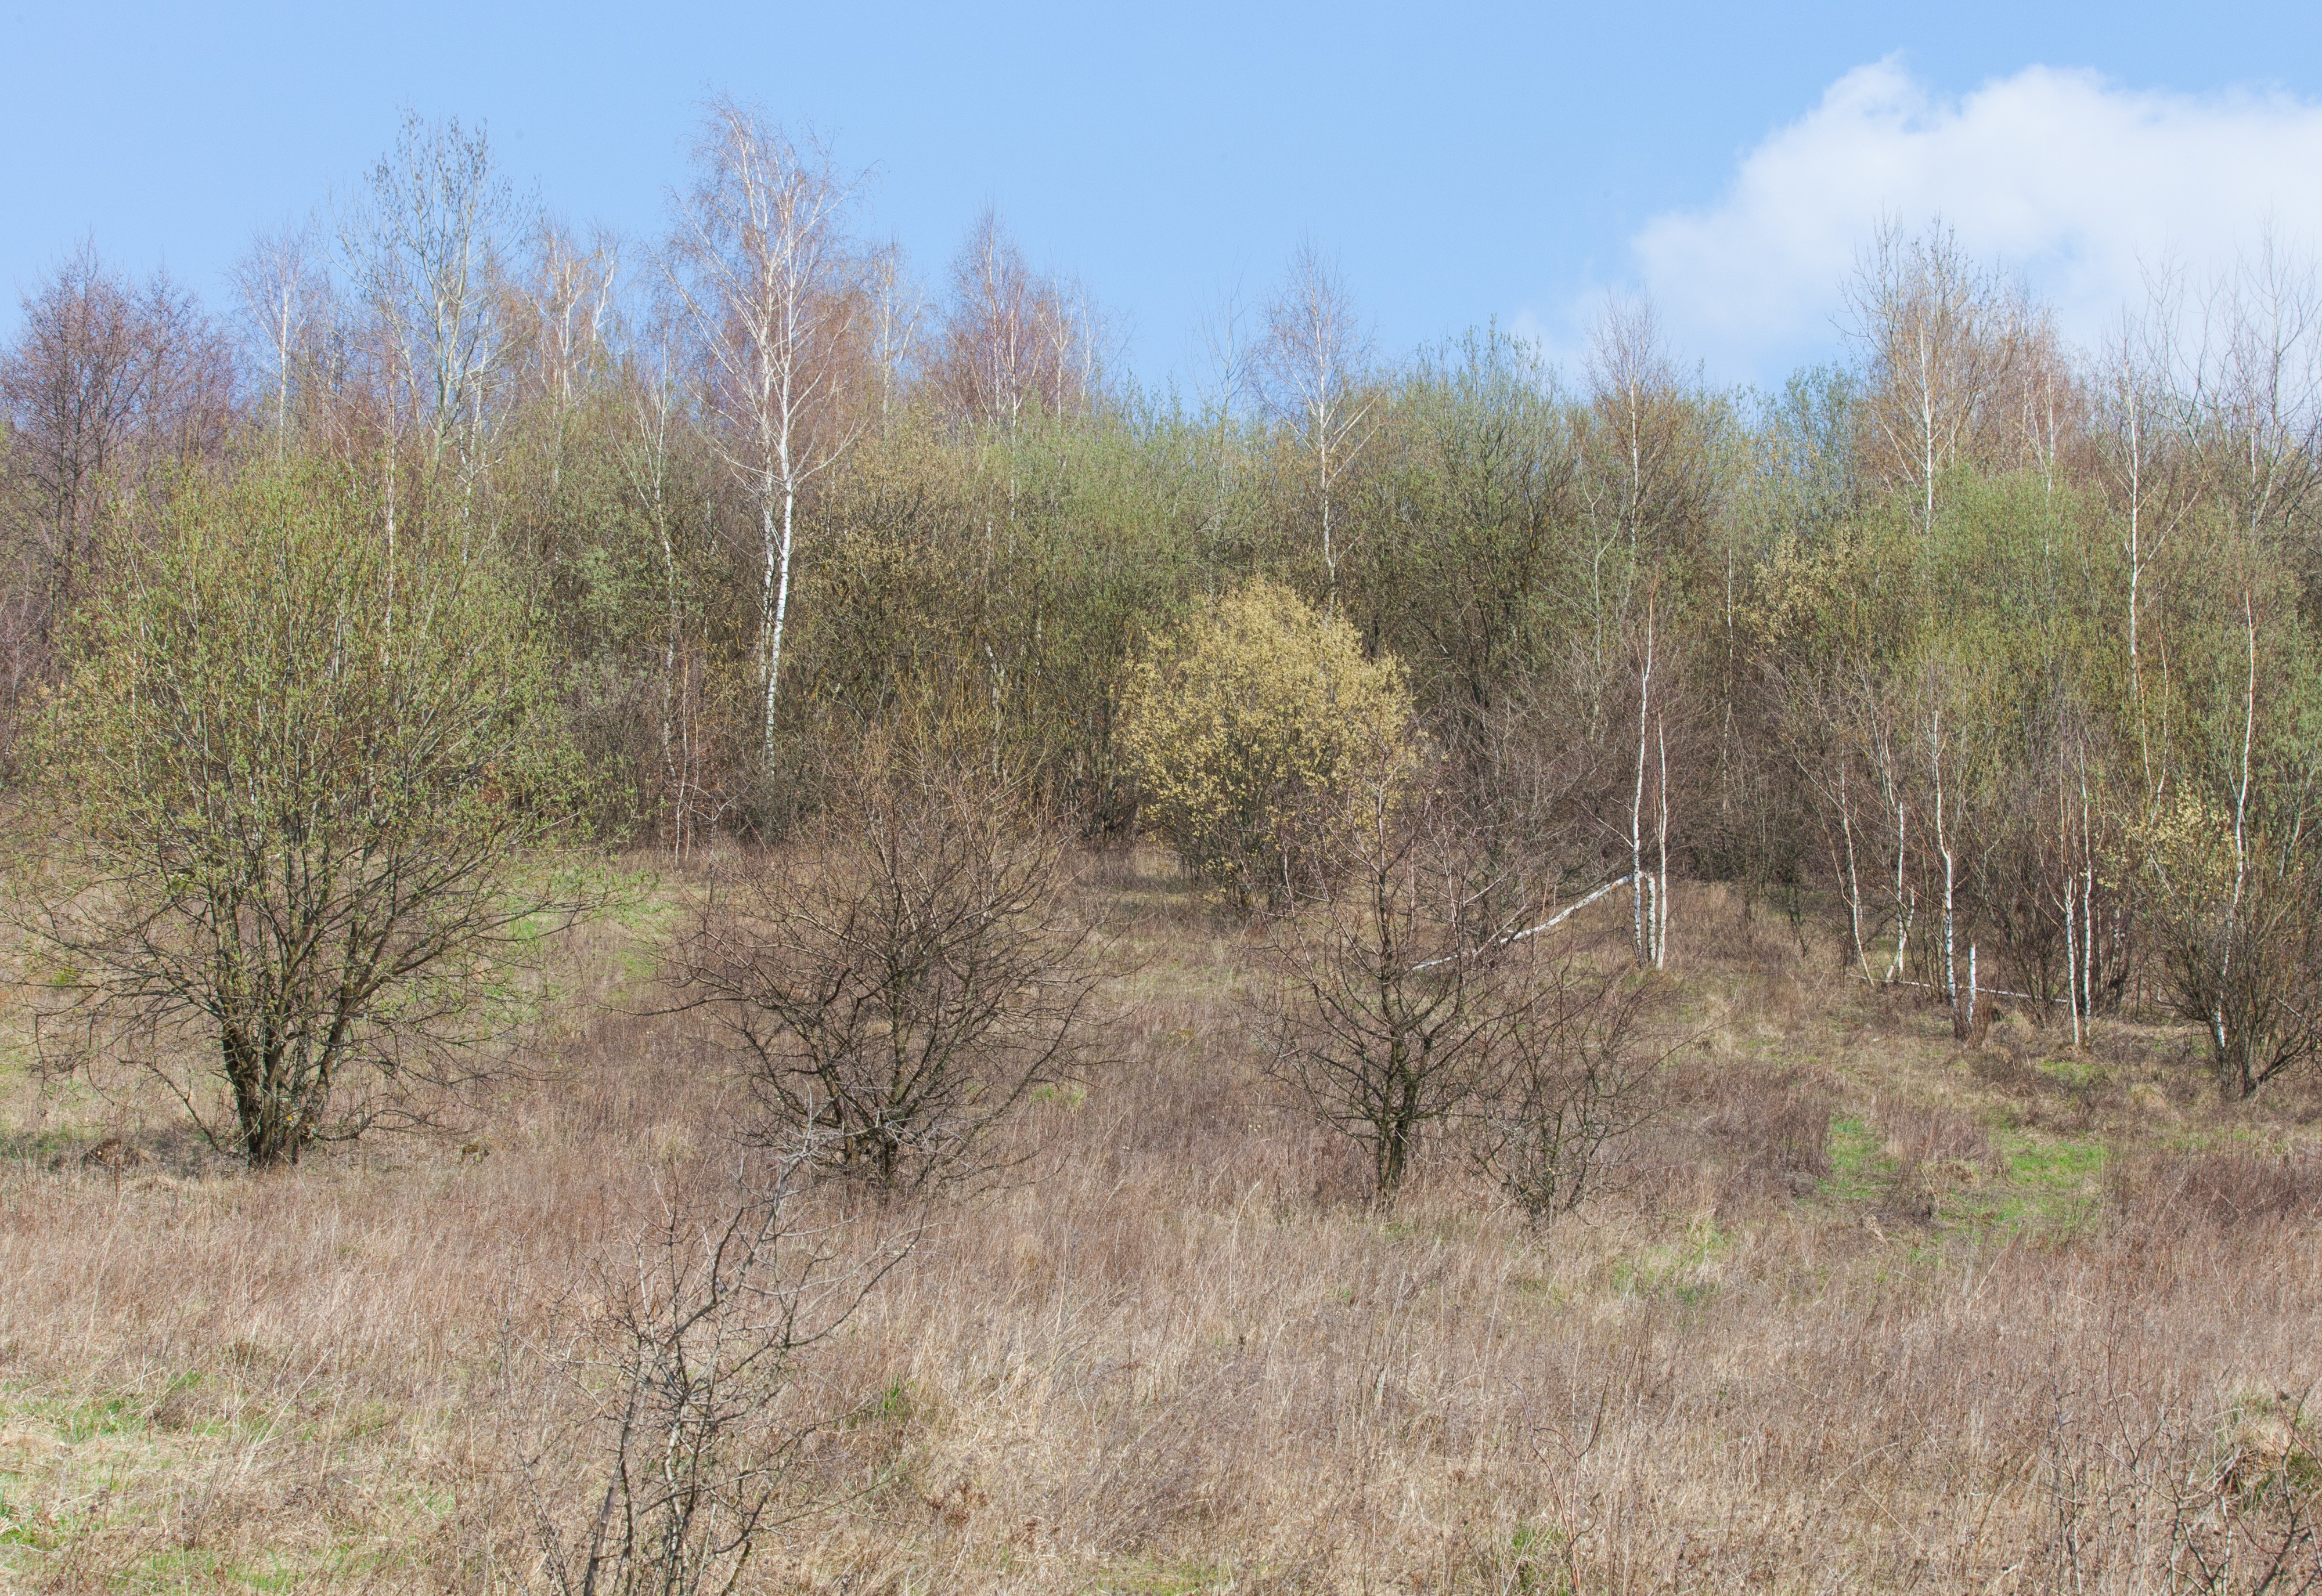 trees with first young leaves in Lviv region of Ukraine in March 2014